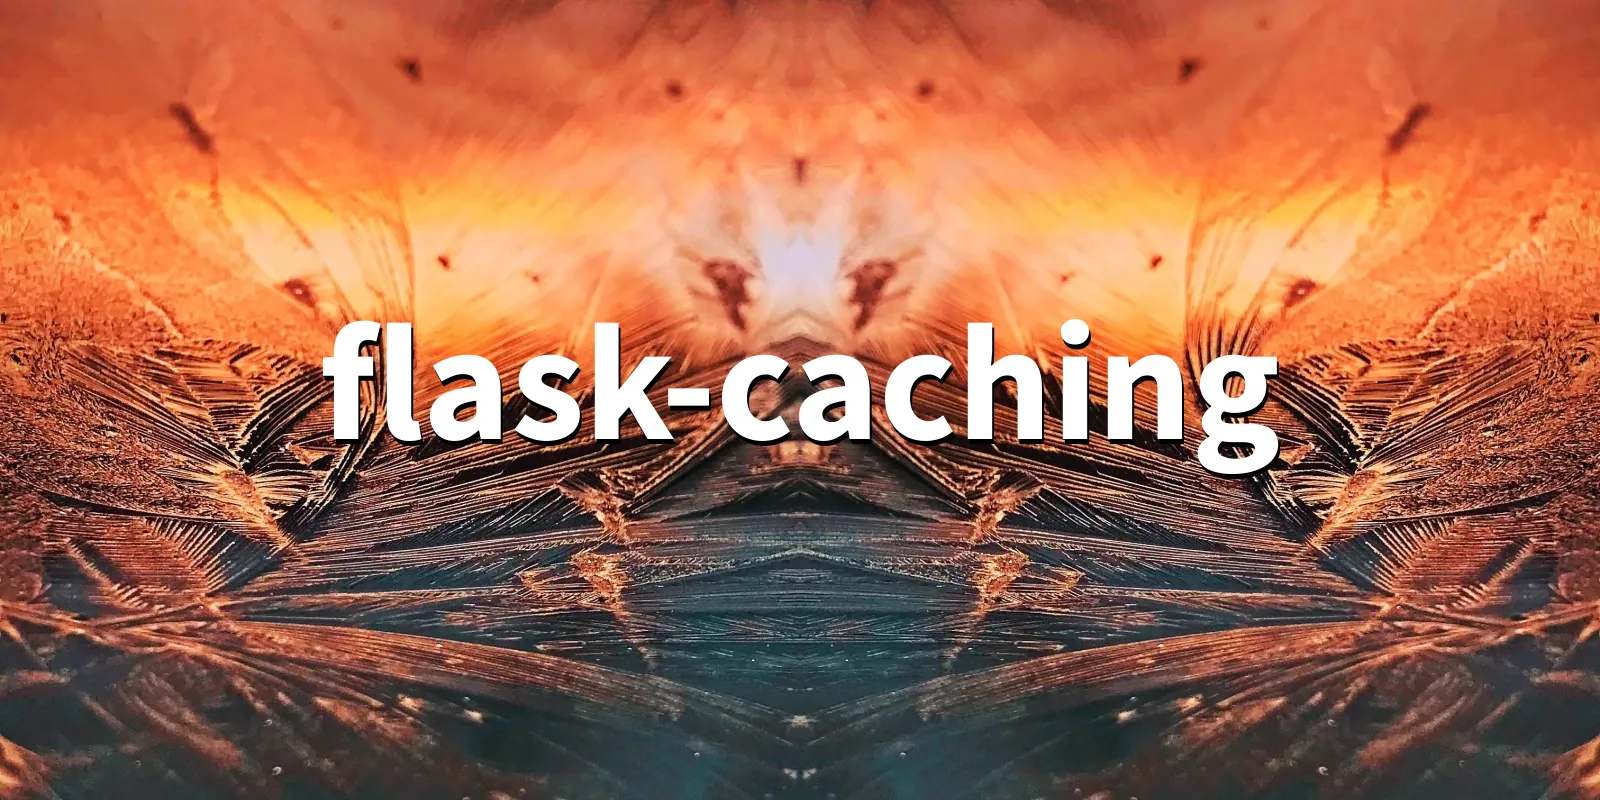 /pkg/f/flask-caching/flask-caching-banner.webp